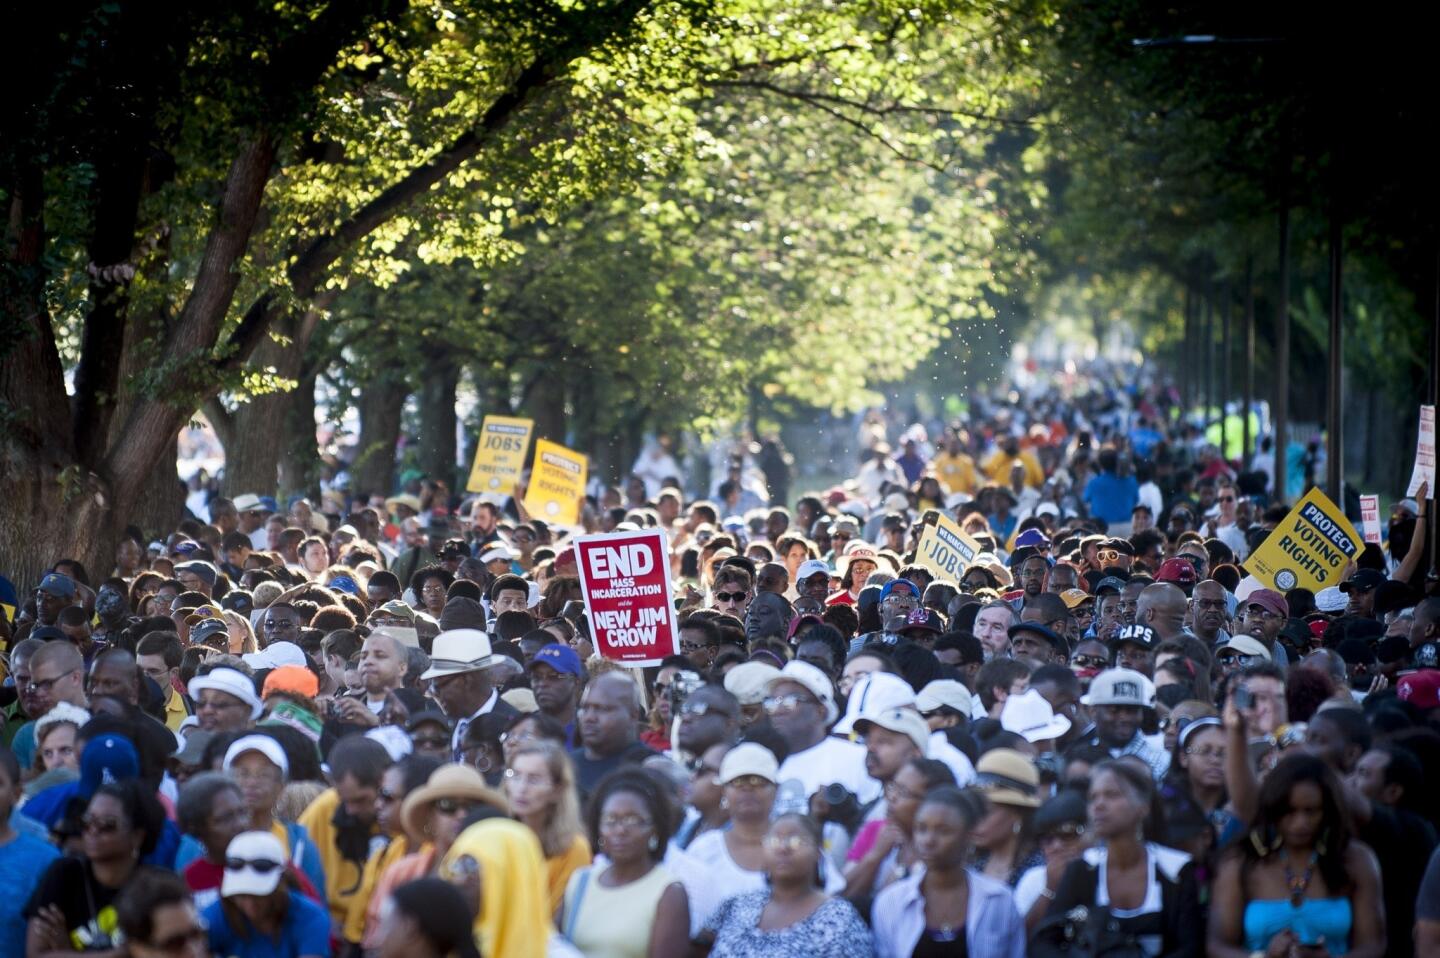 People arrive at the National Mall to celebrate the 50th anniversary of the March on Washington and the Rev. Martin Luther King Jr.'s "I Have a Dream" speech.